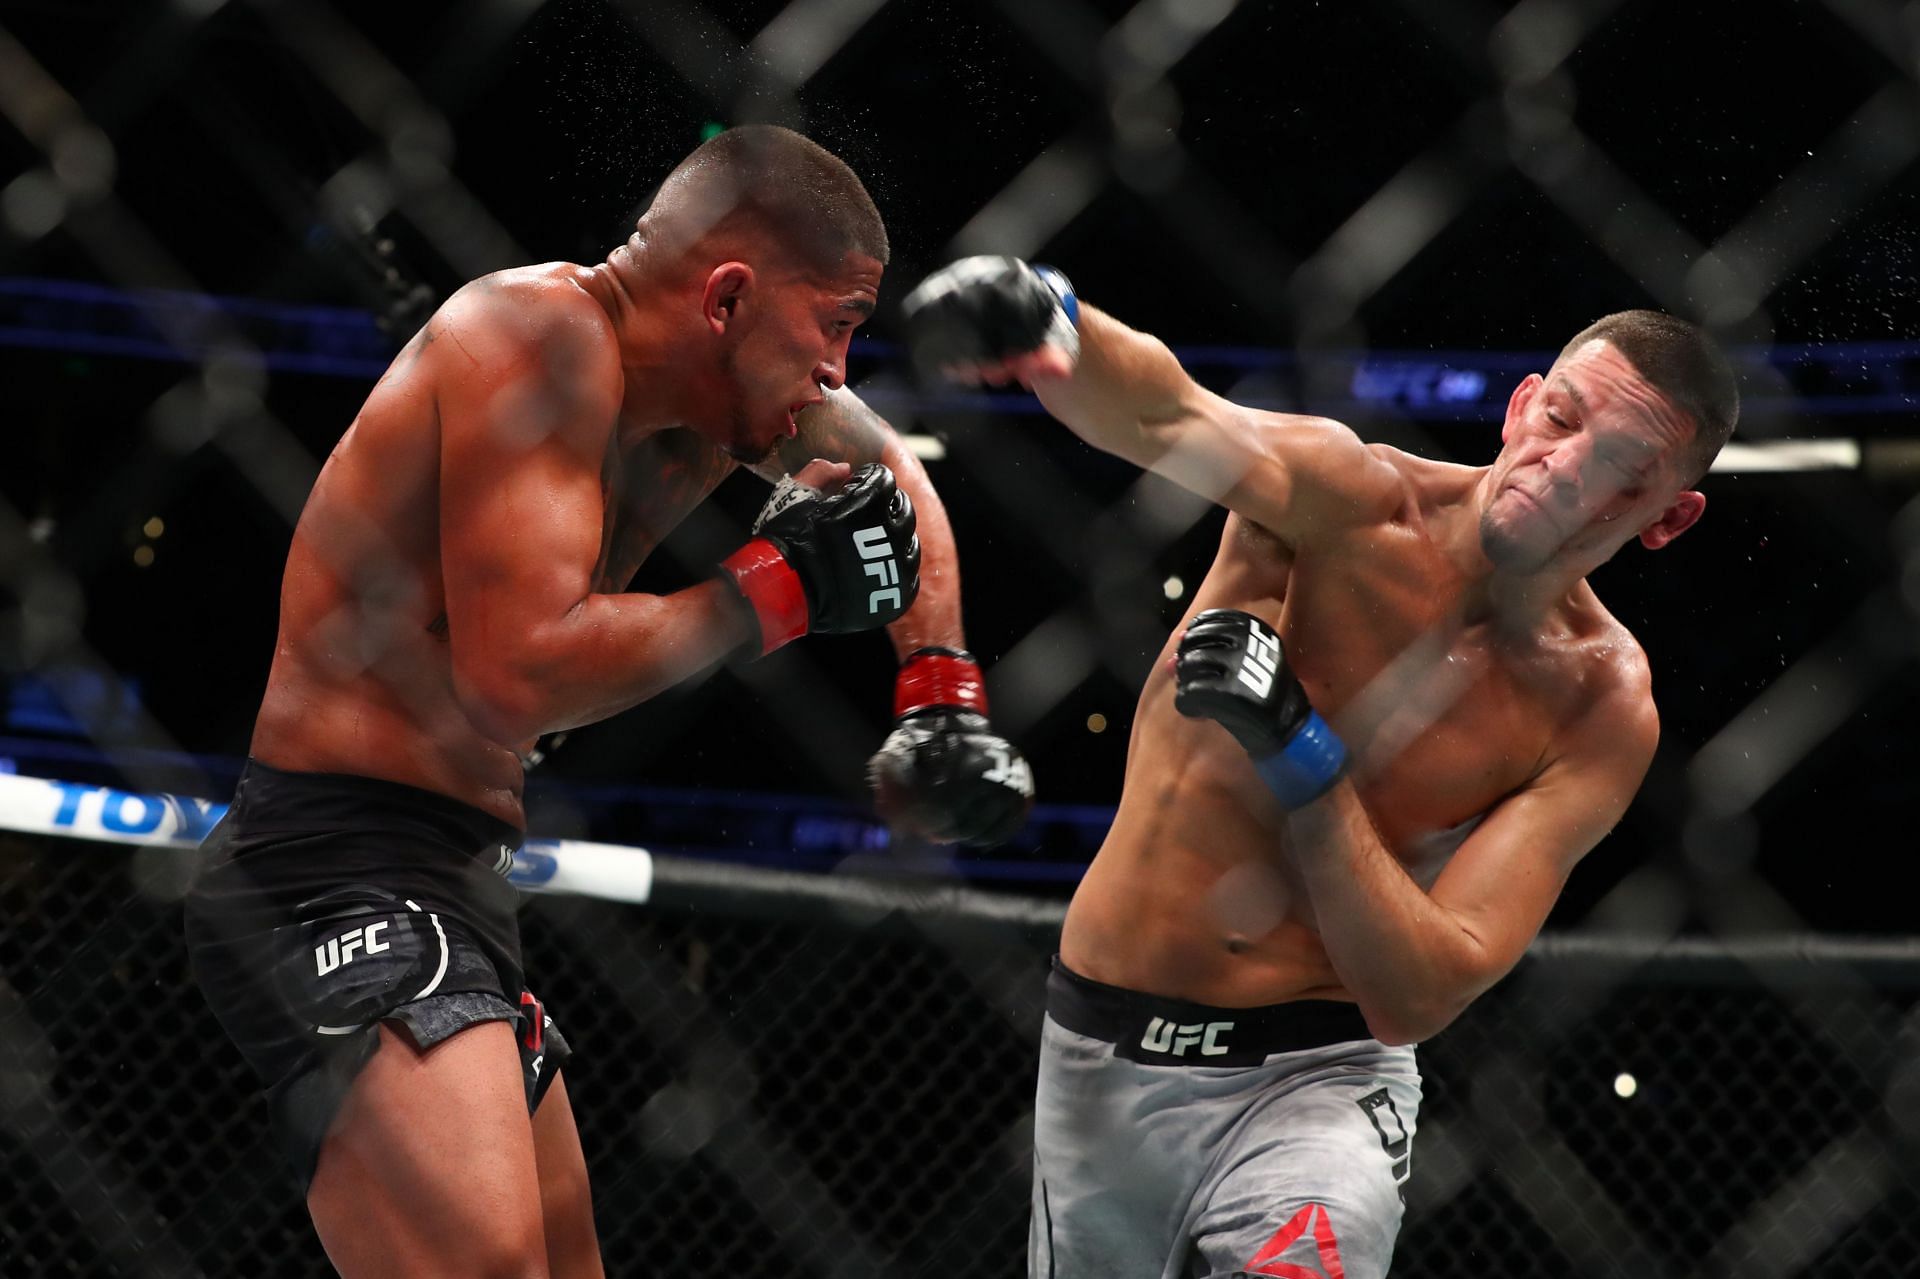 Nate Diaz holds wins over former UFC champions